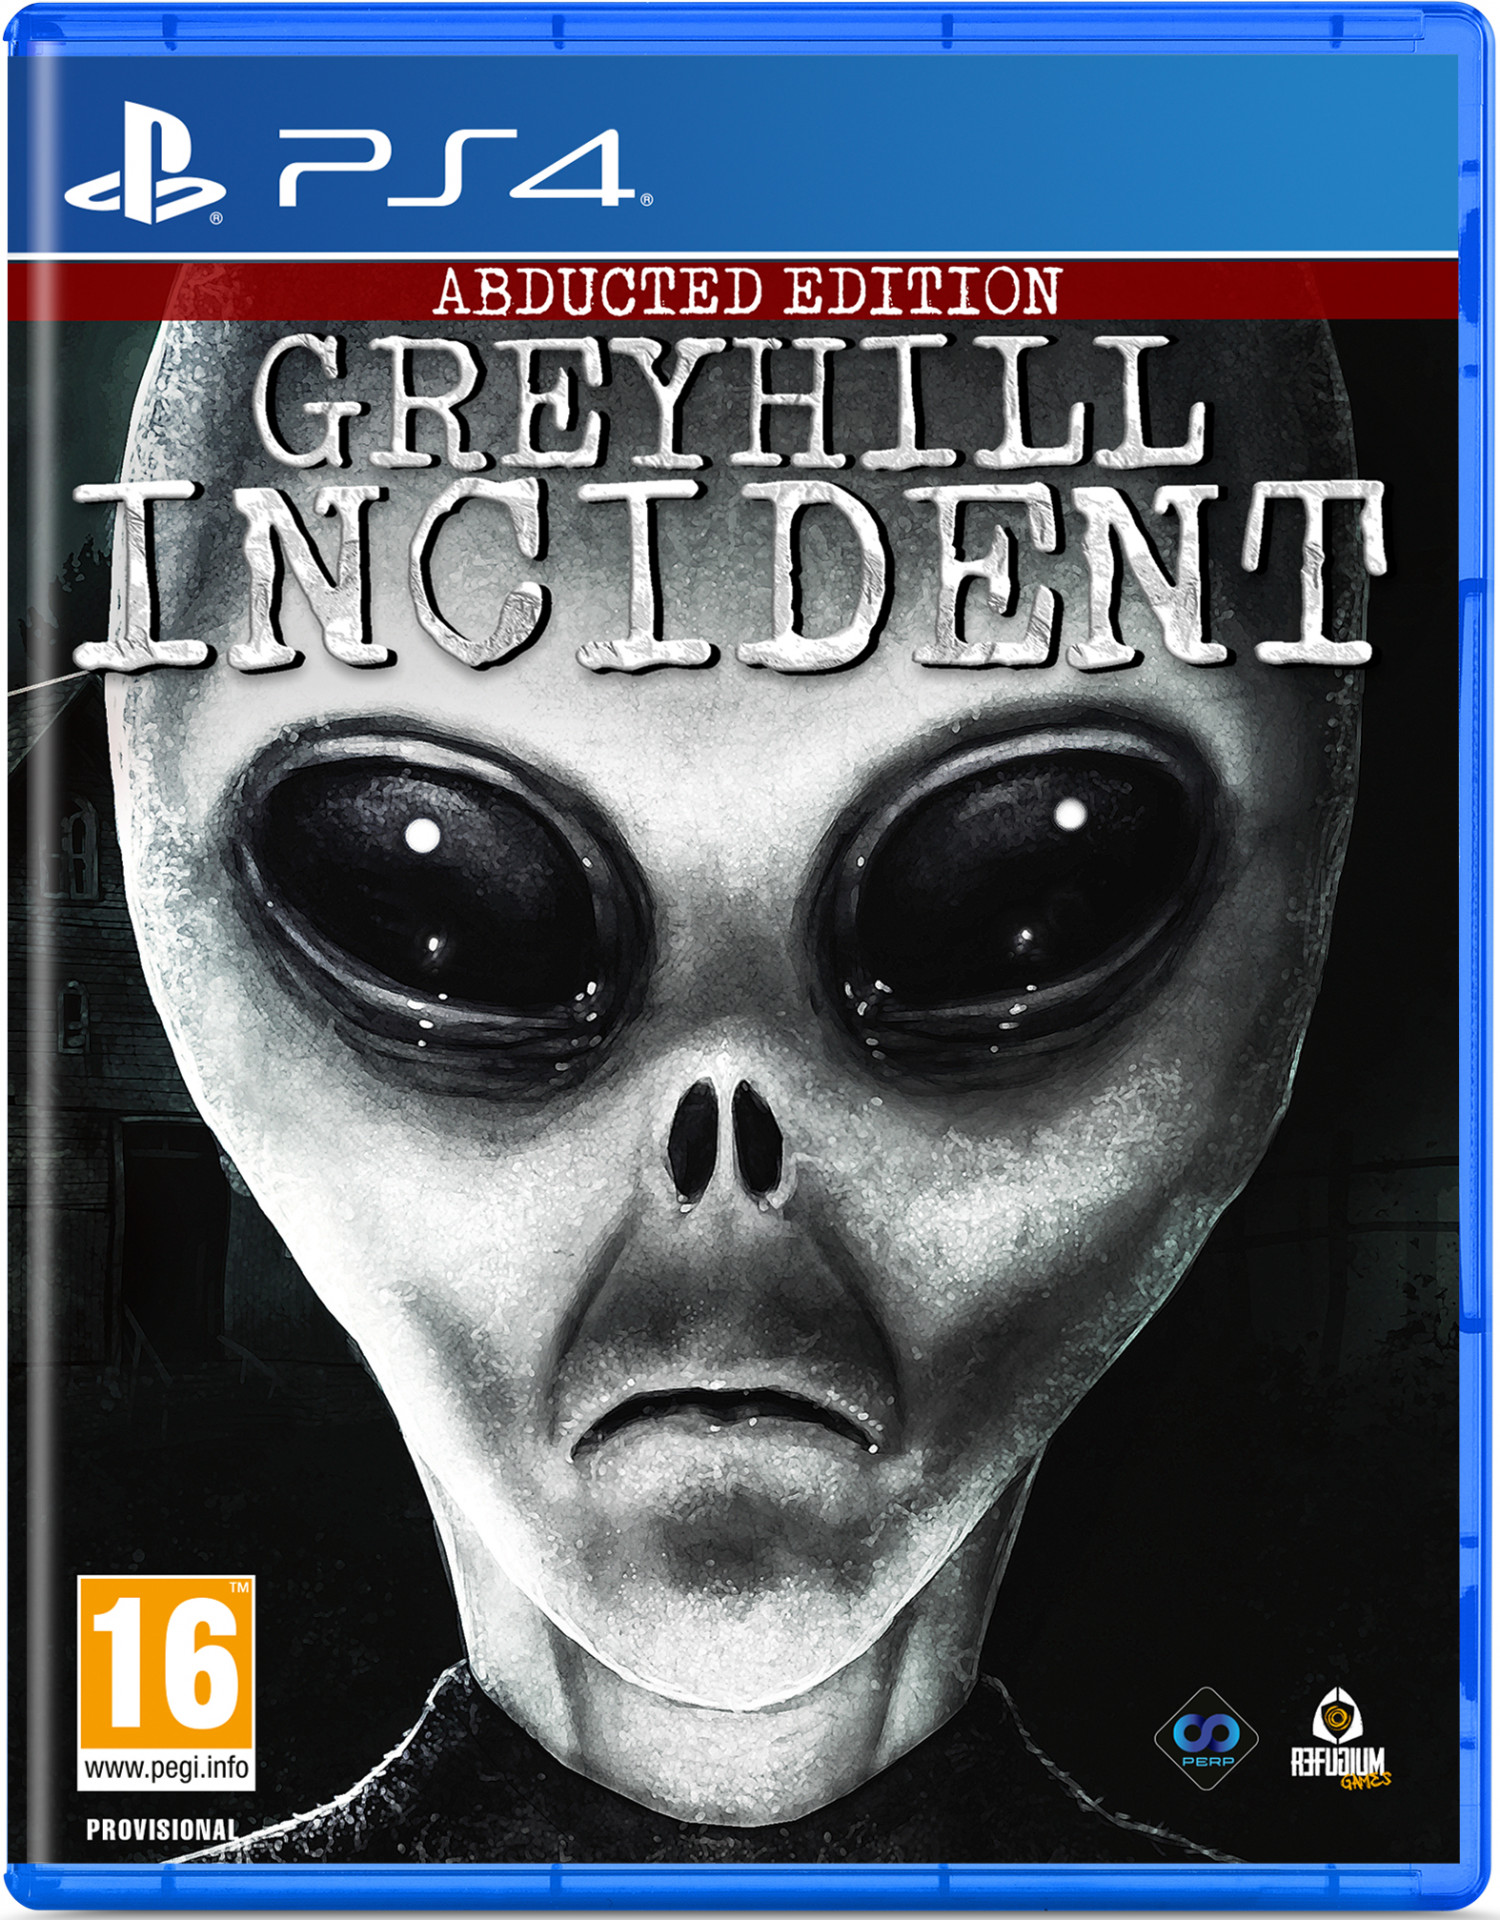 Greyhill Incident - Abducted Edition (PS4), Refugium Games